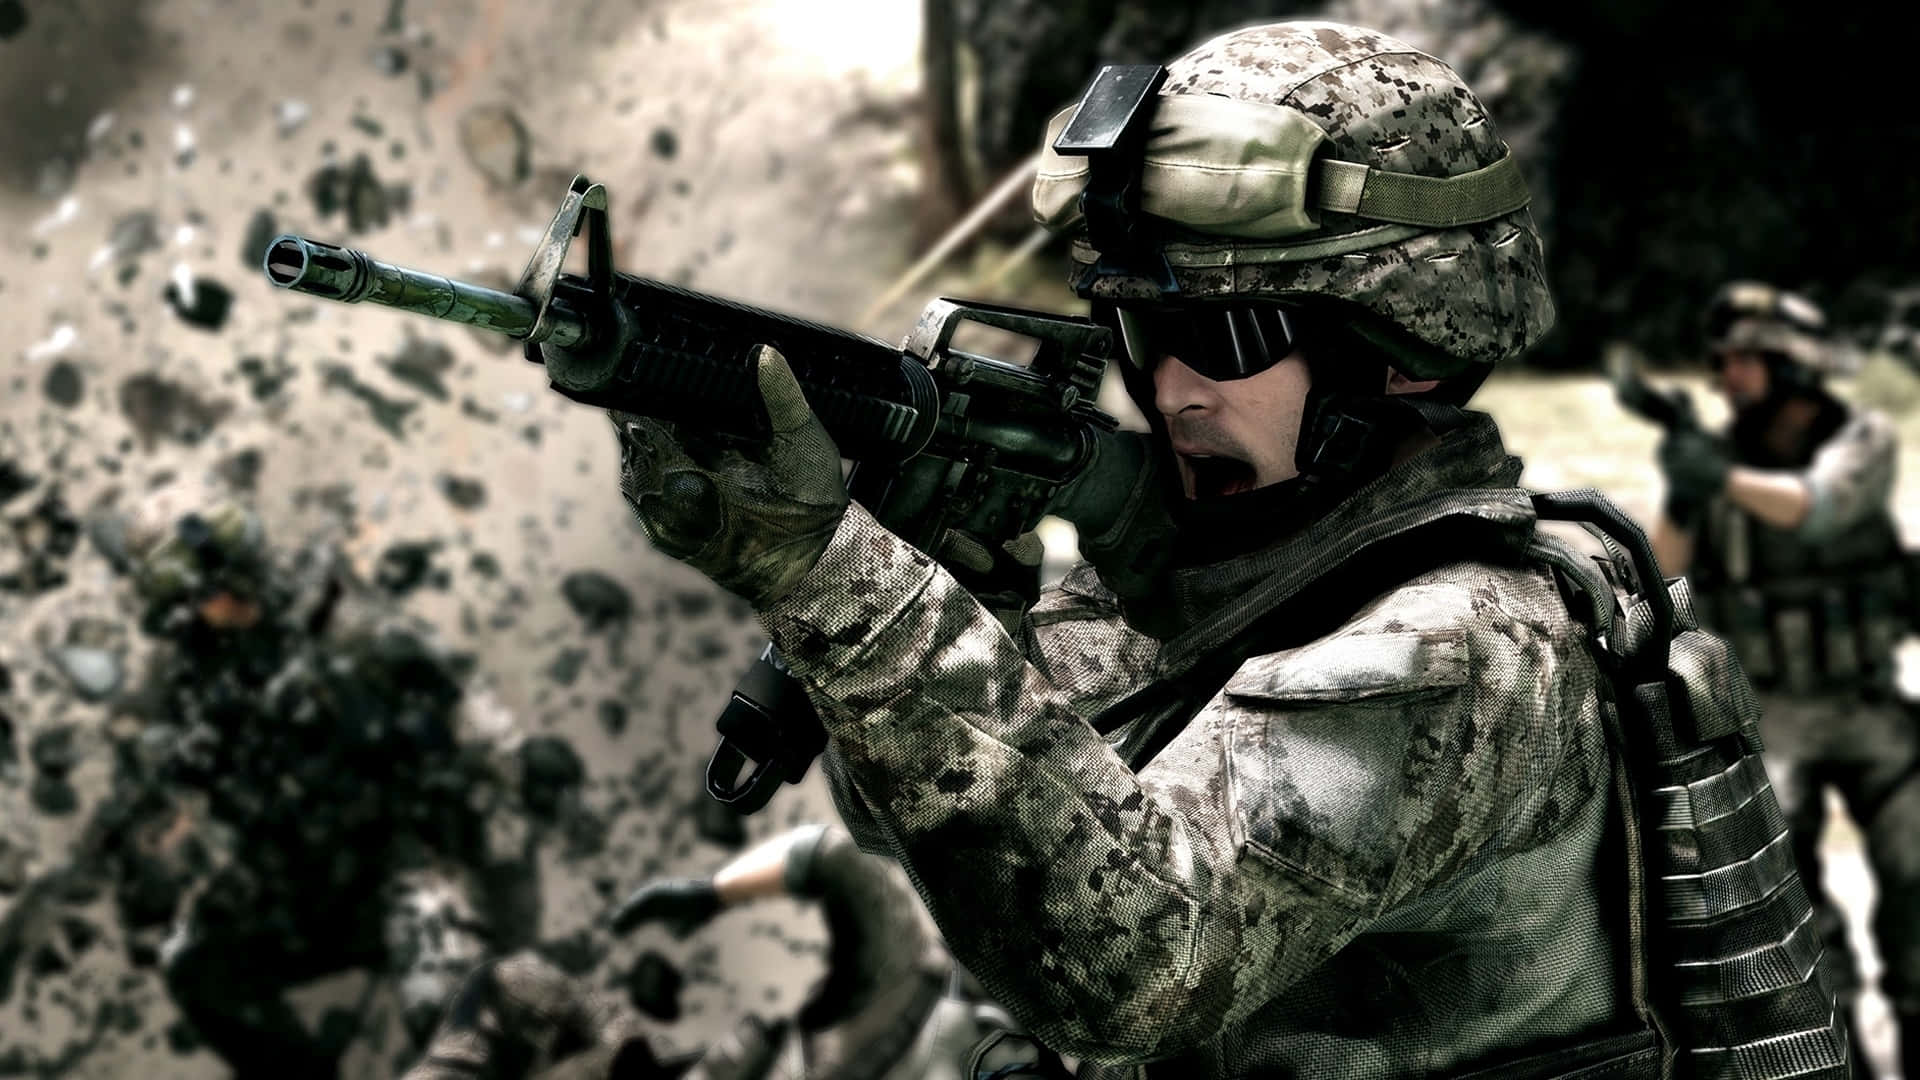 Explore the intensity and beauty of Battlefield 3